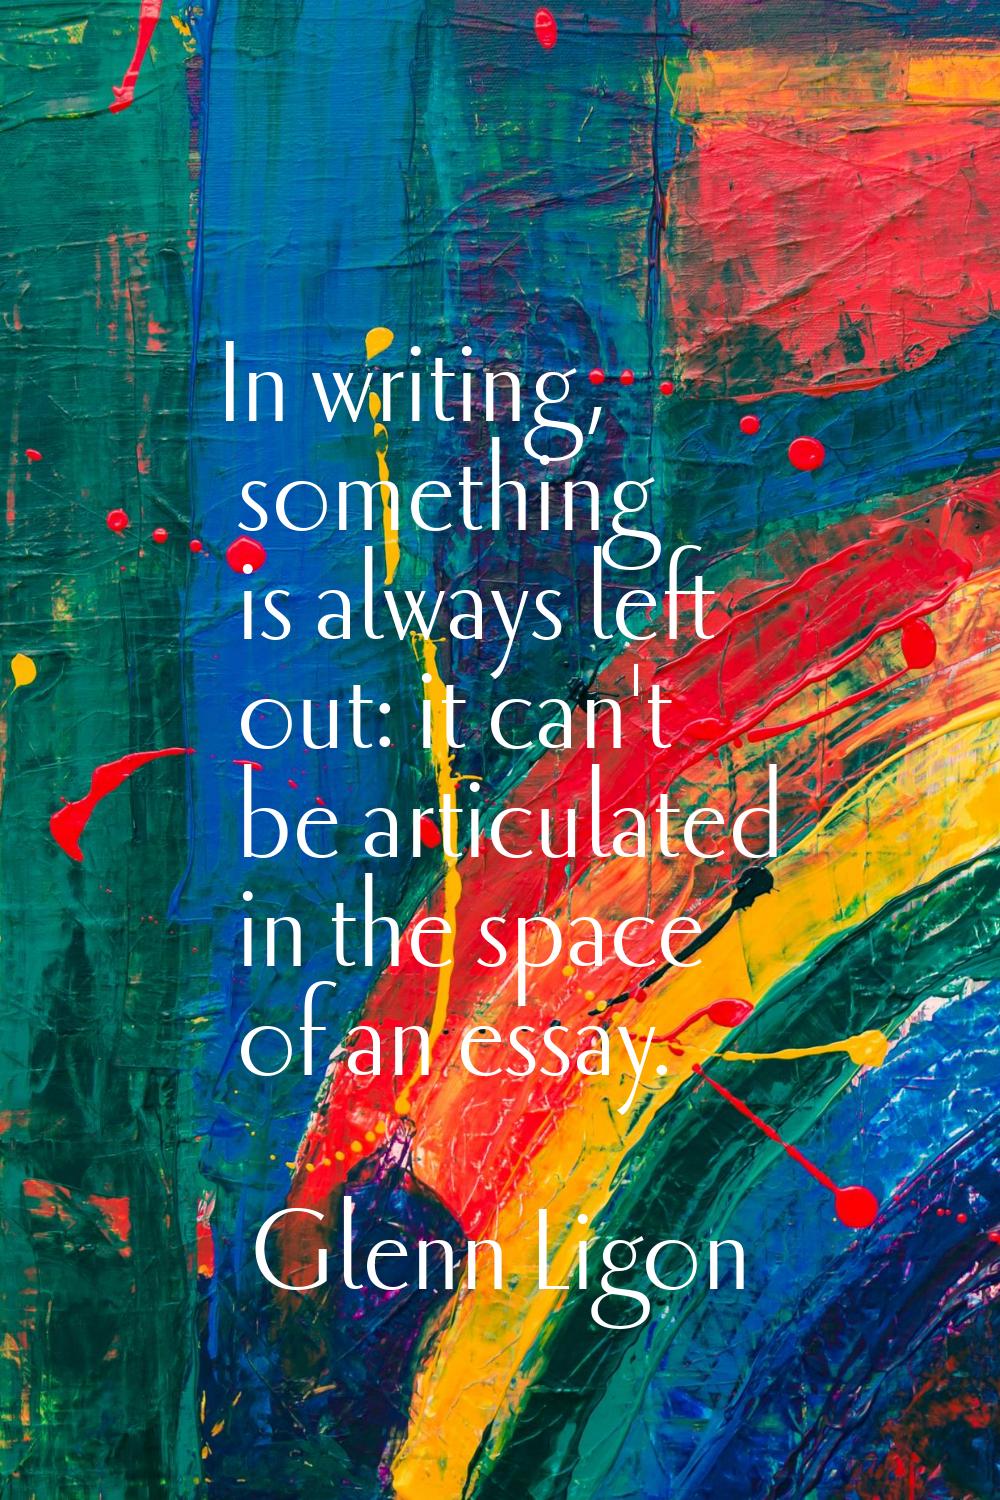 In writing, something is always left out: it can't be articulated in the space of an essay.